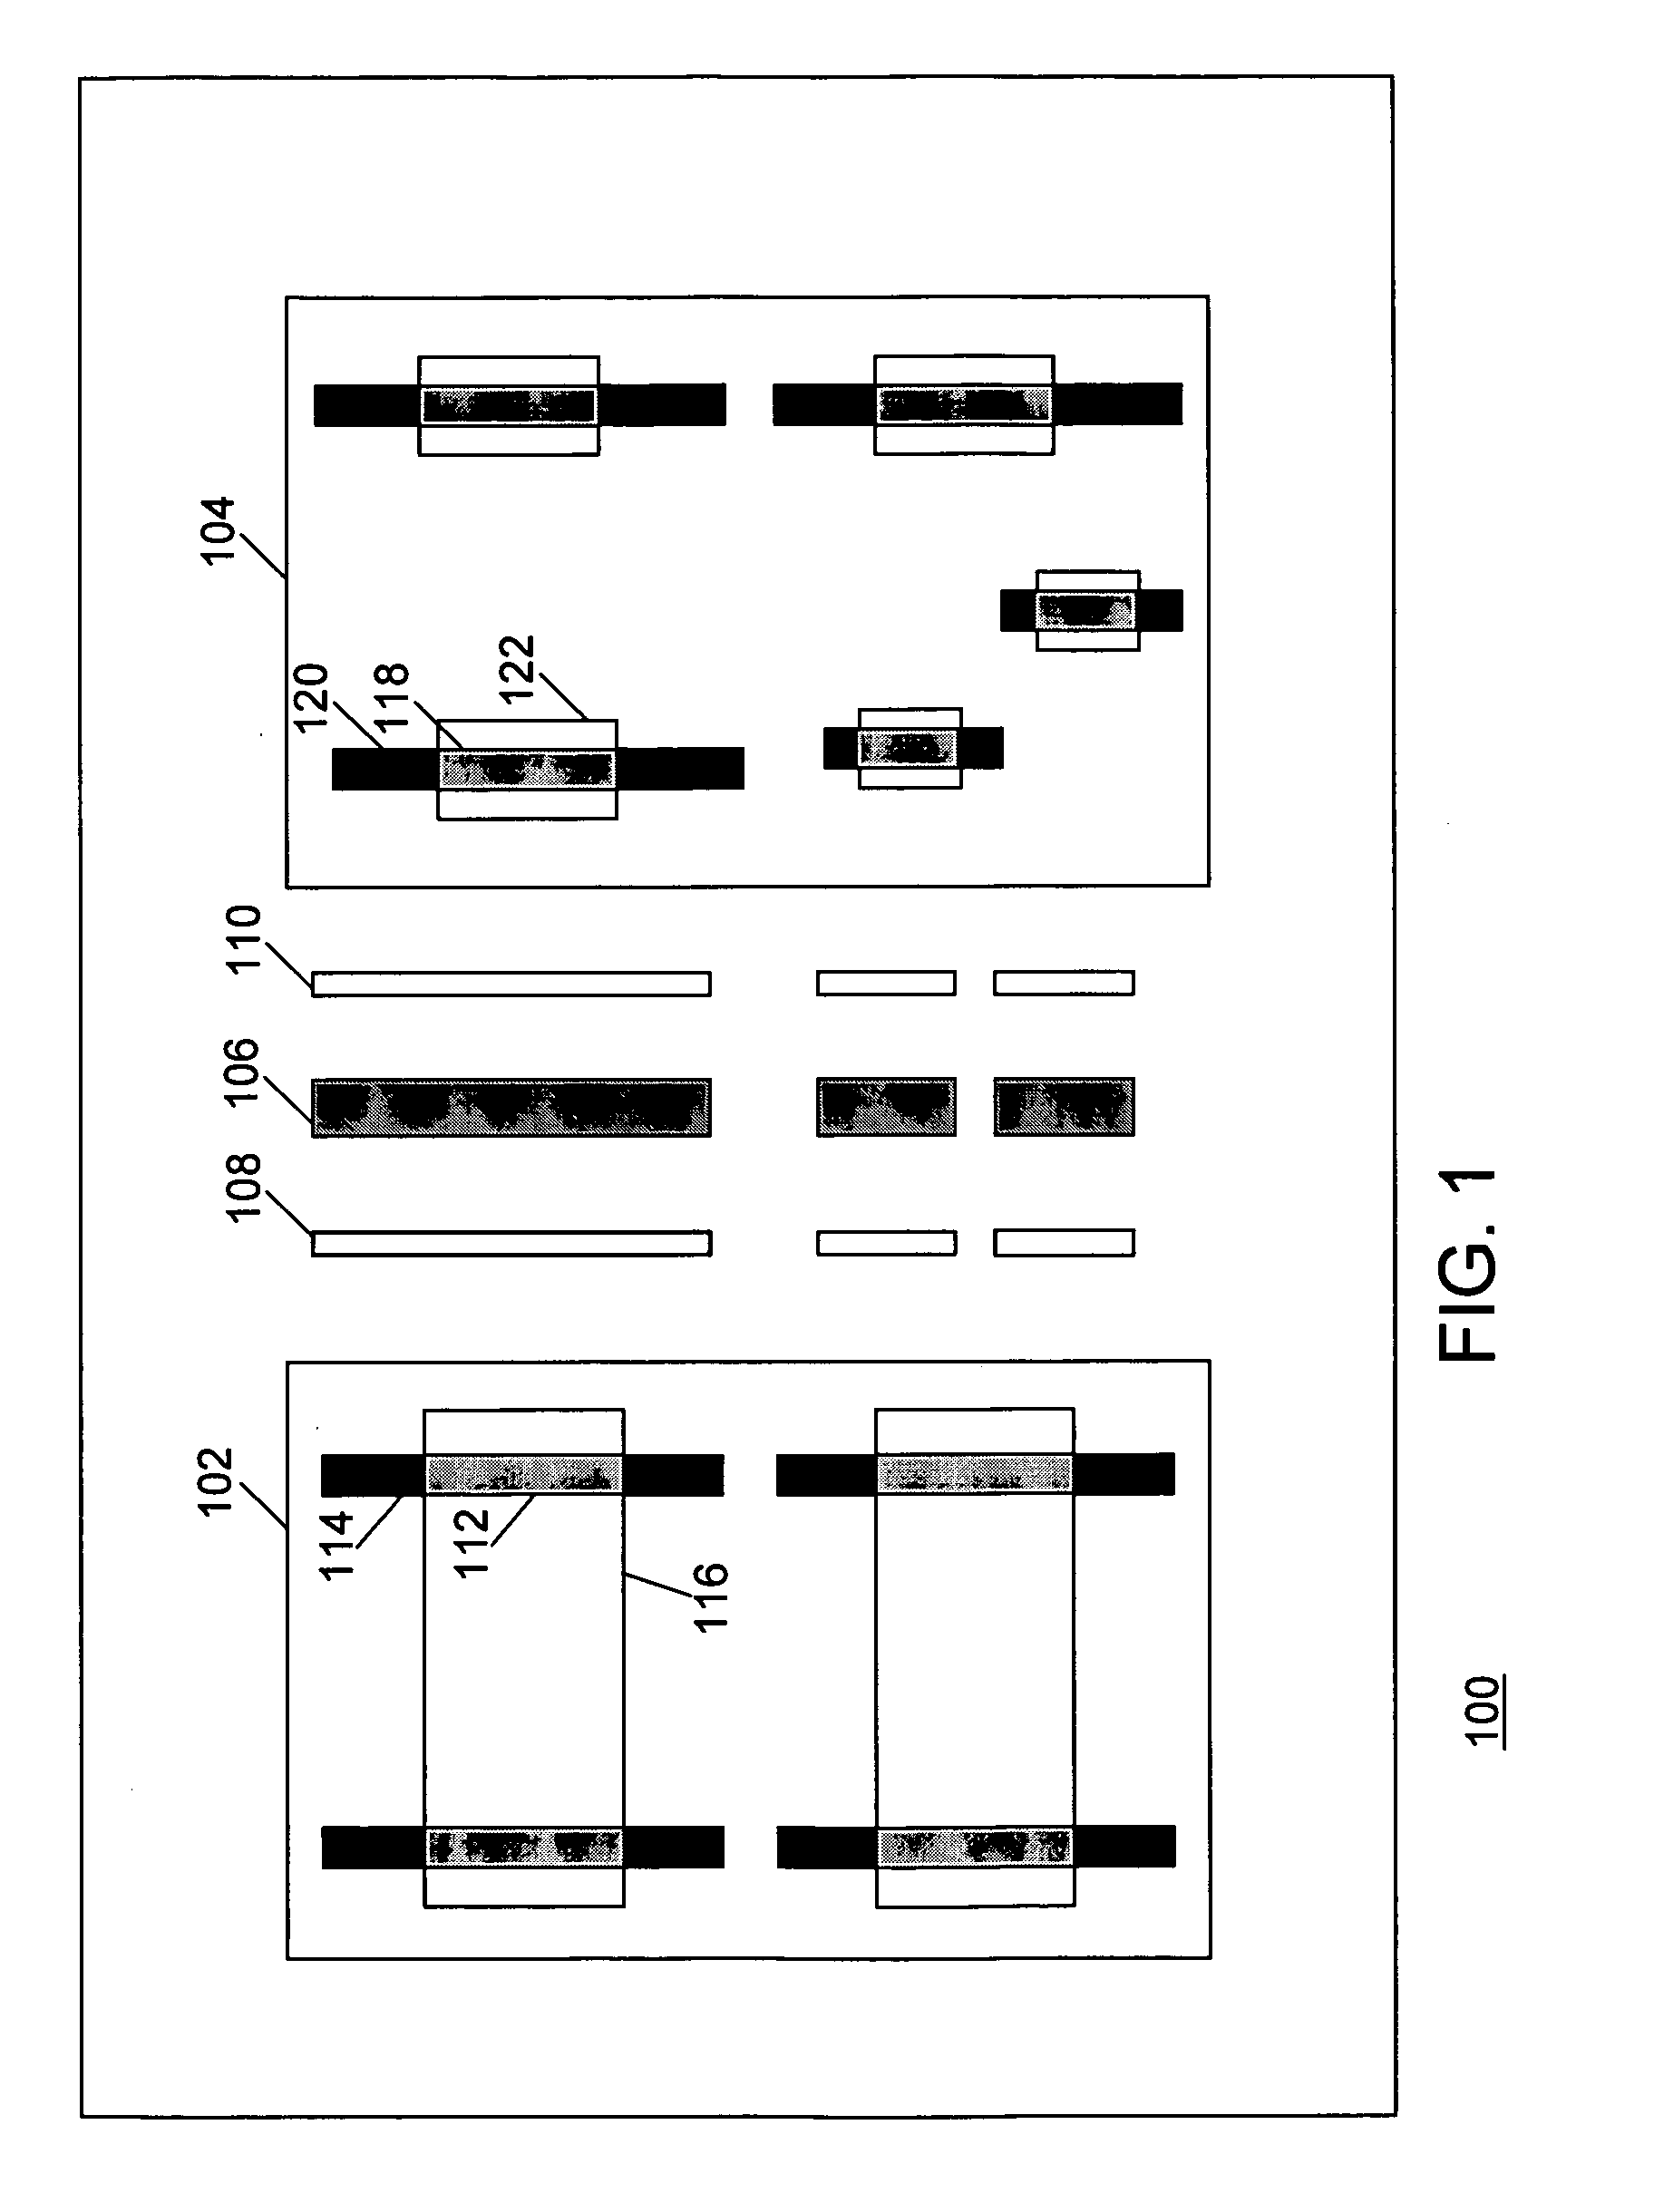 Method and system for detailed placement of layout objects in a standard-cell layout design